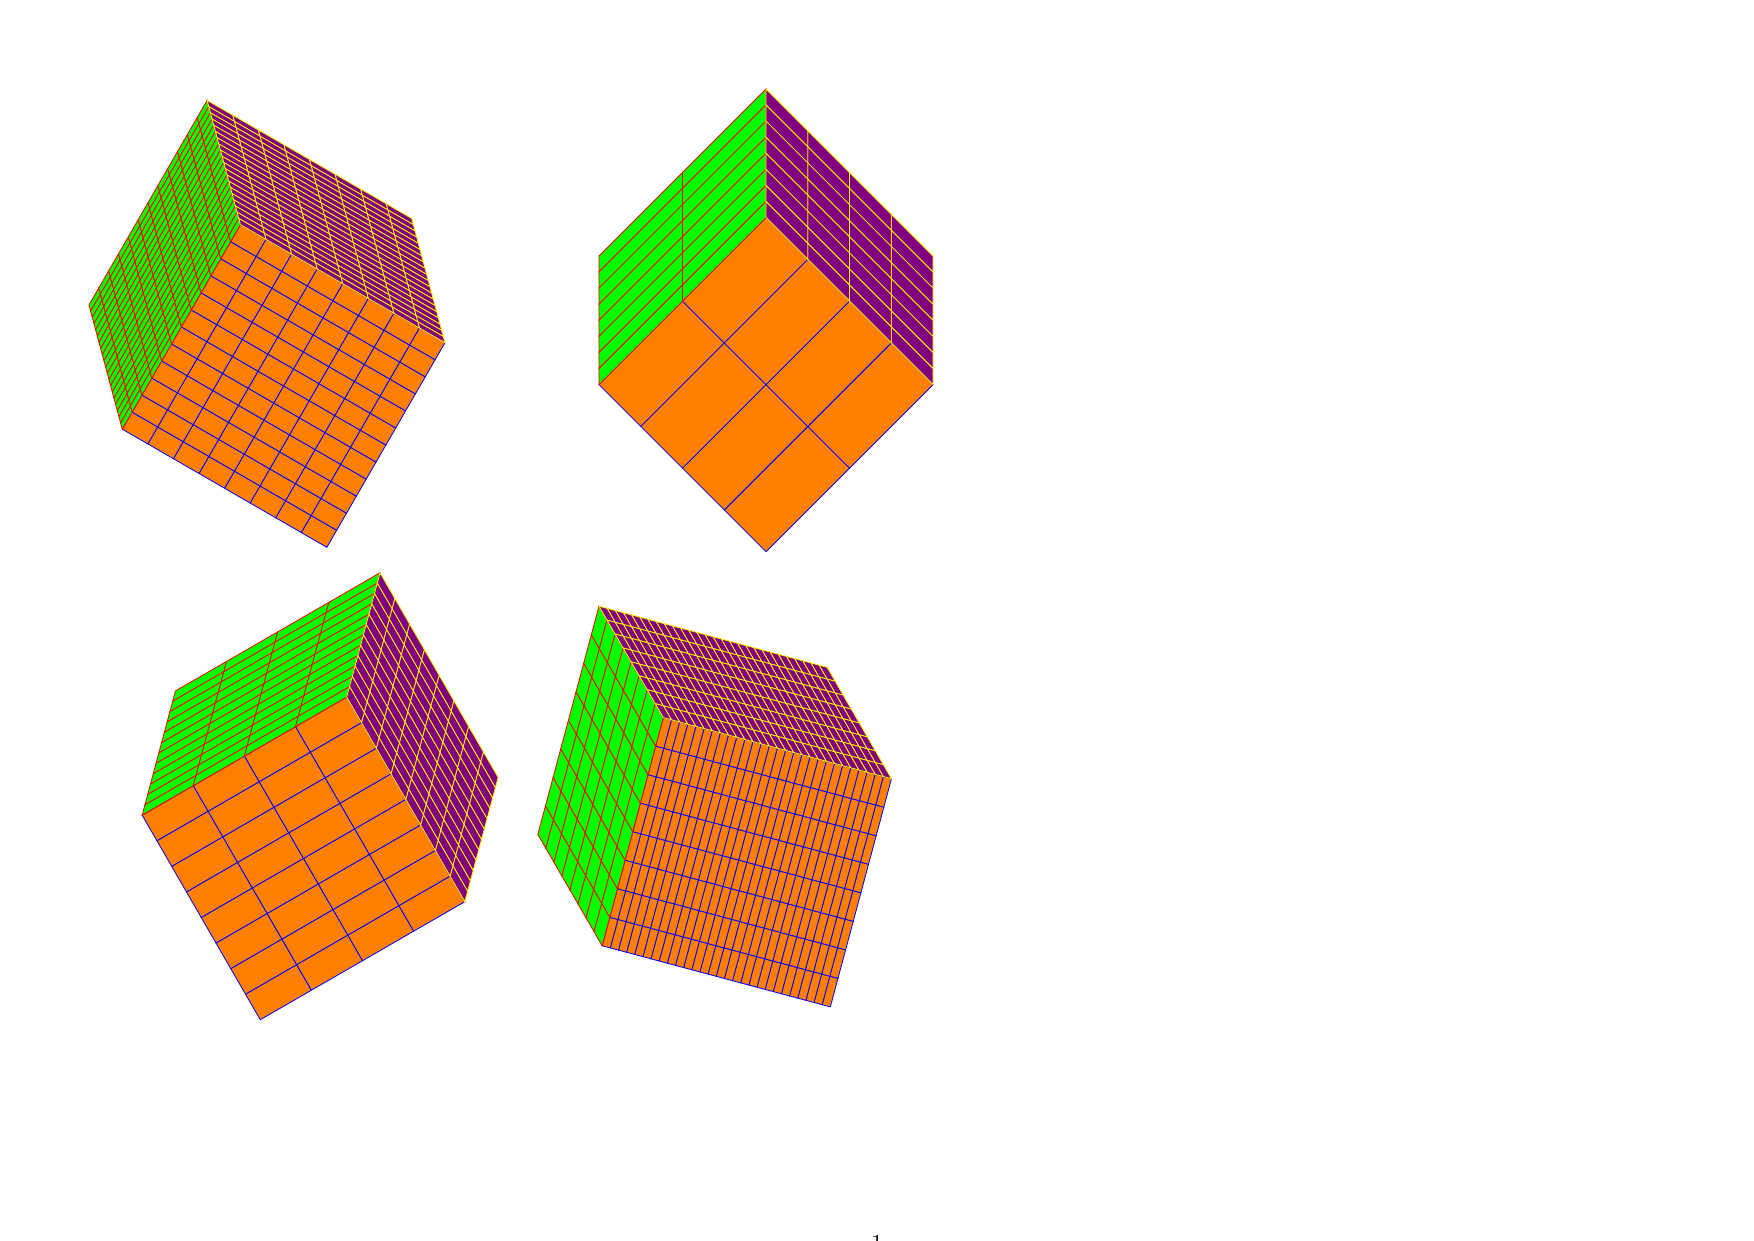 3d-cube_color_rotated+3d+pgf+foreach+command+define.png